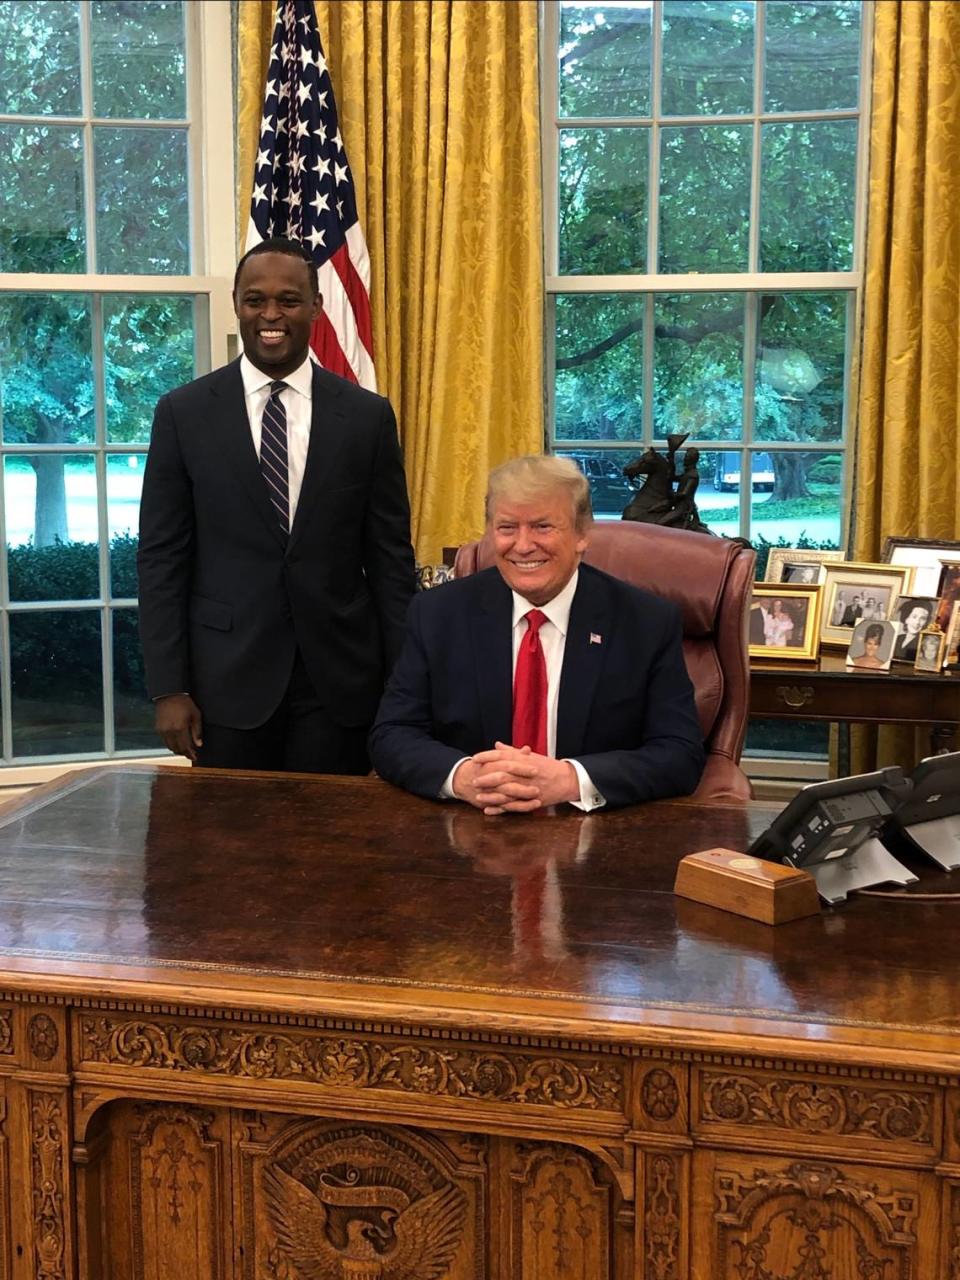 Kentucky Republican attorney general candidate Daniel Cameron meets with President Donald Trump in the White House prior to receiving Trump’s endorsement.